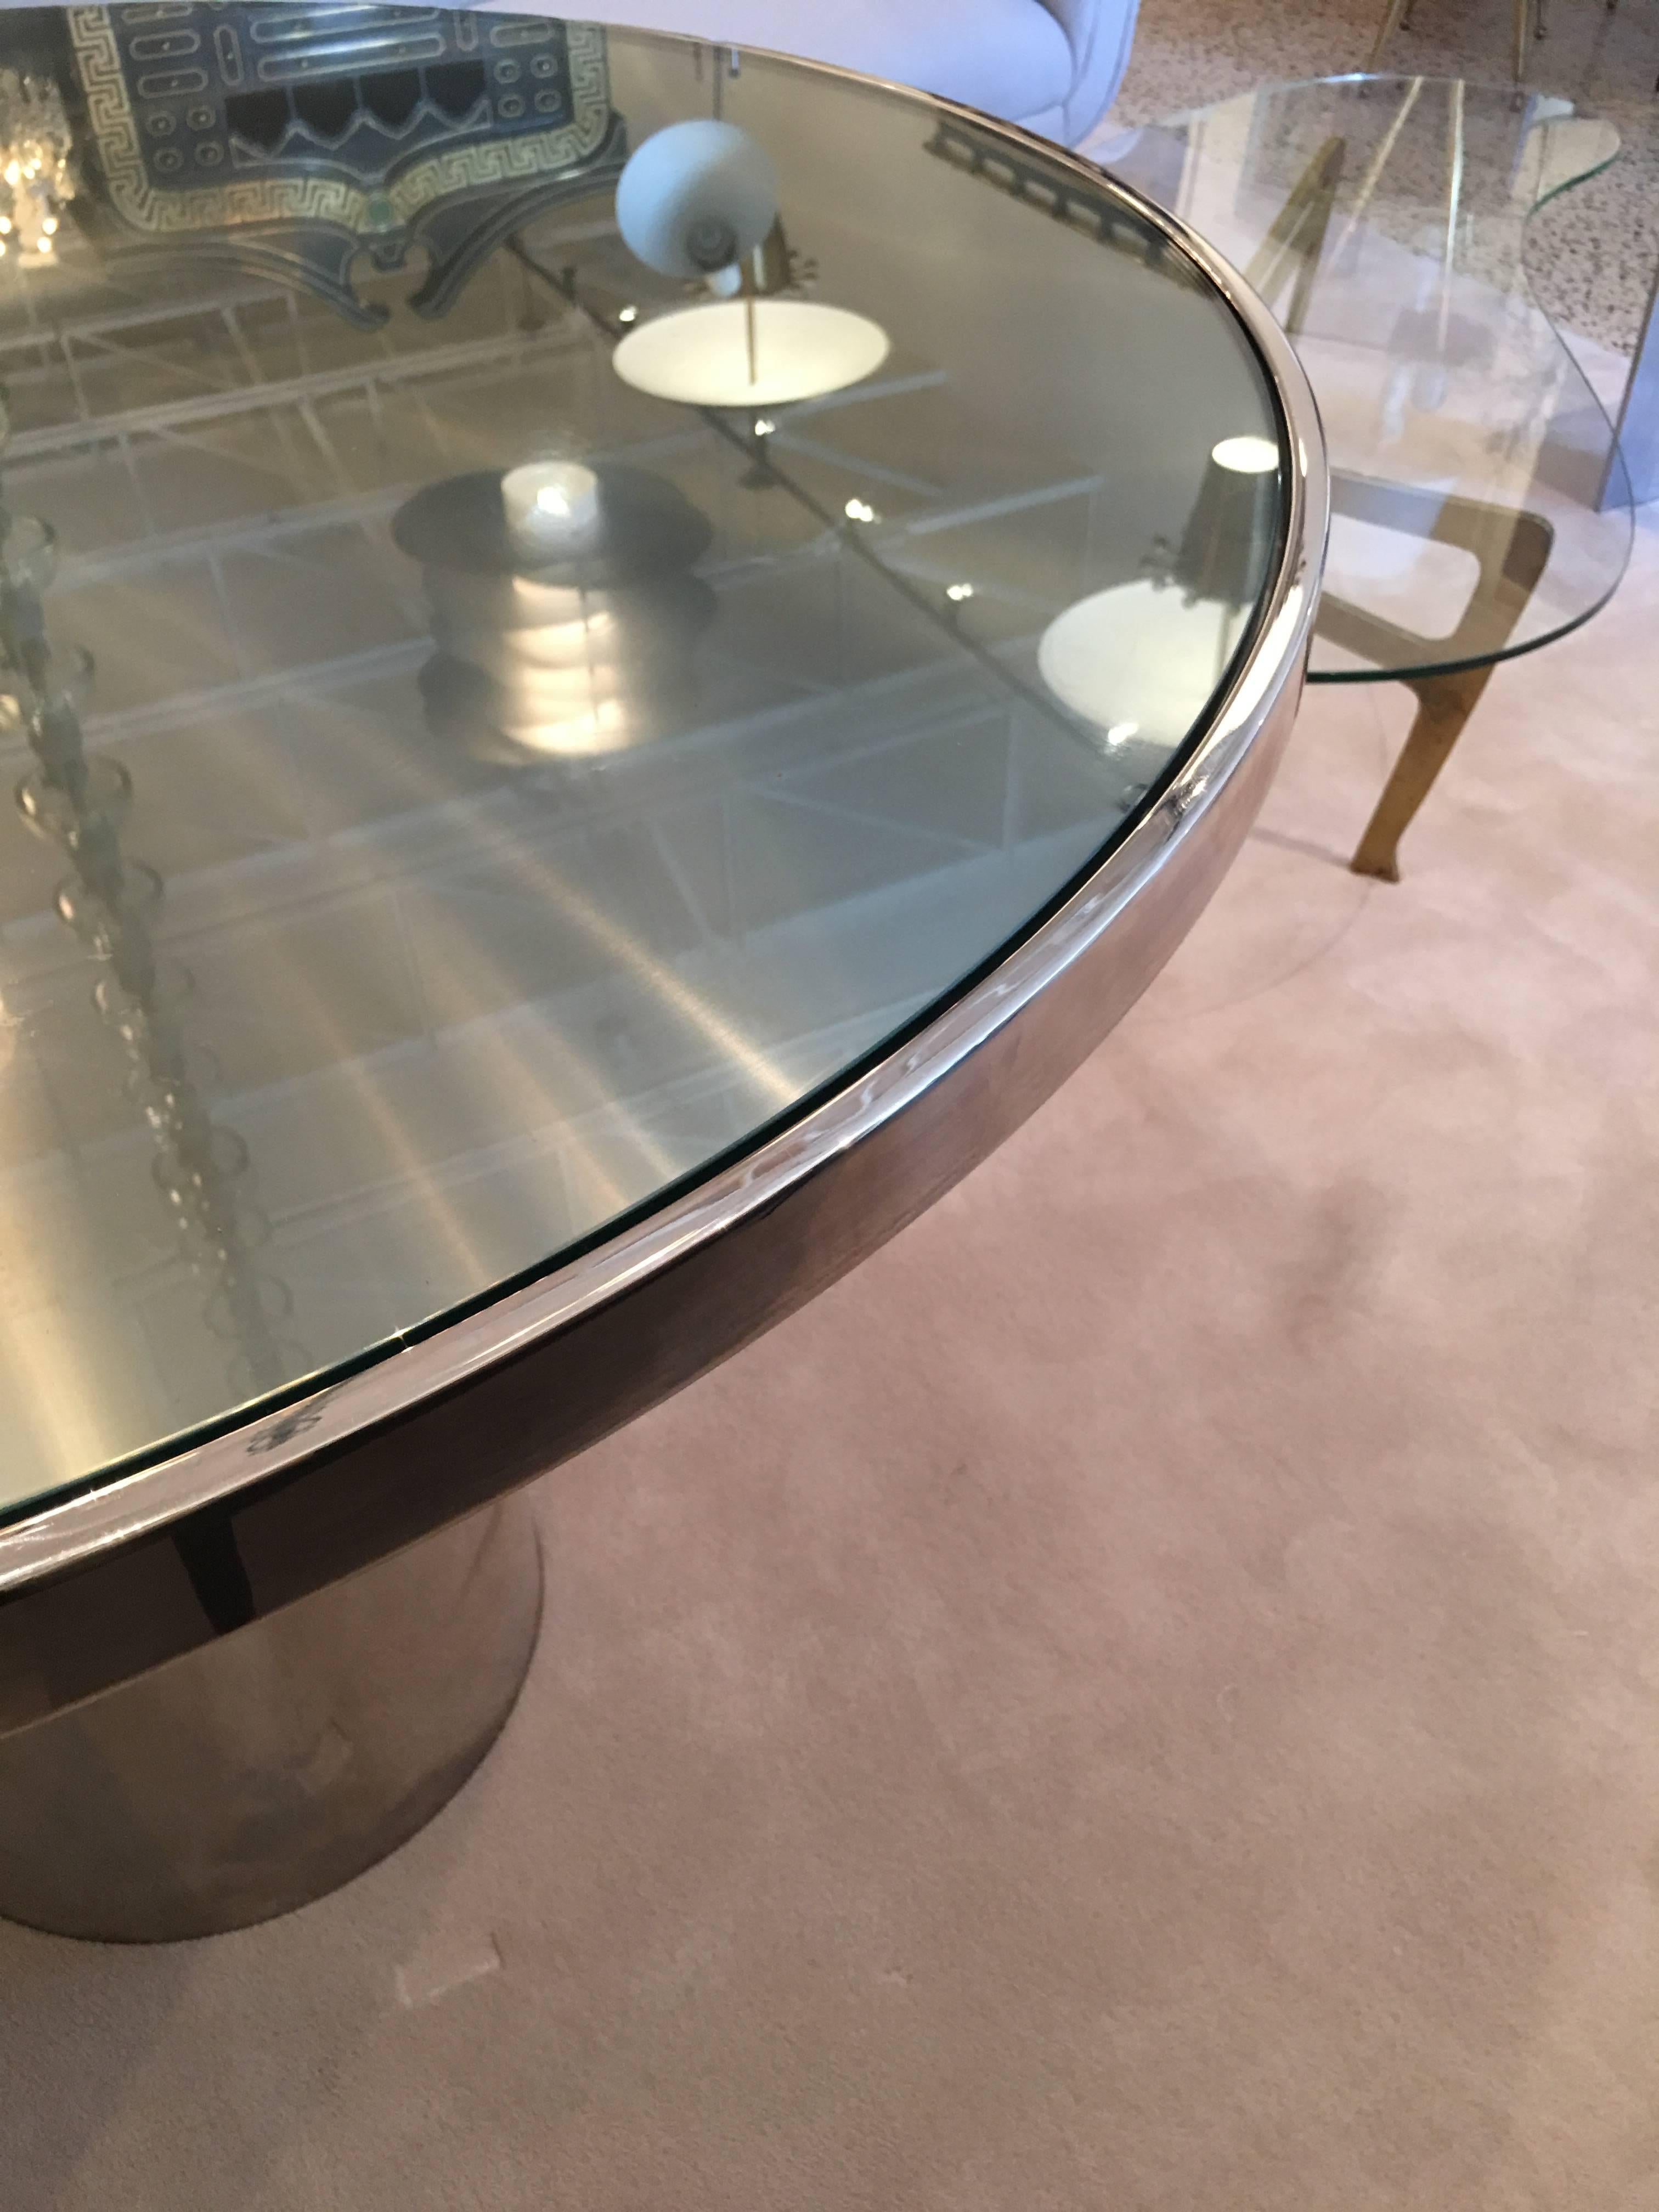 The glass top floats on a stainless steel base. The base is a seamless chromed stainless steel column. Very heavy and extremely high quality. Glass sits on a brushed stainless steel top.